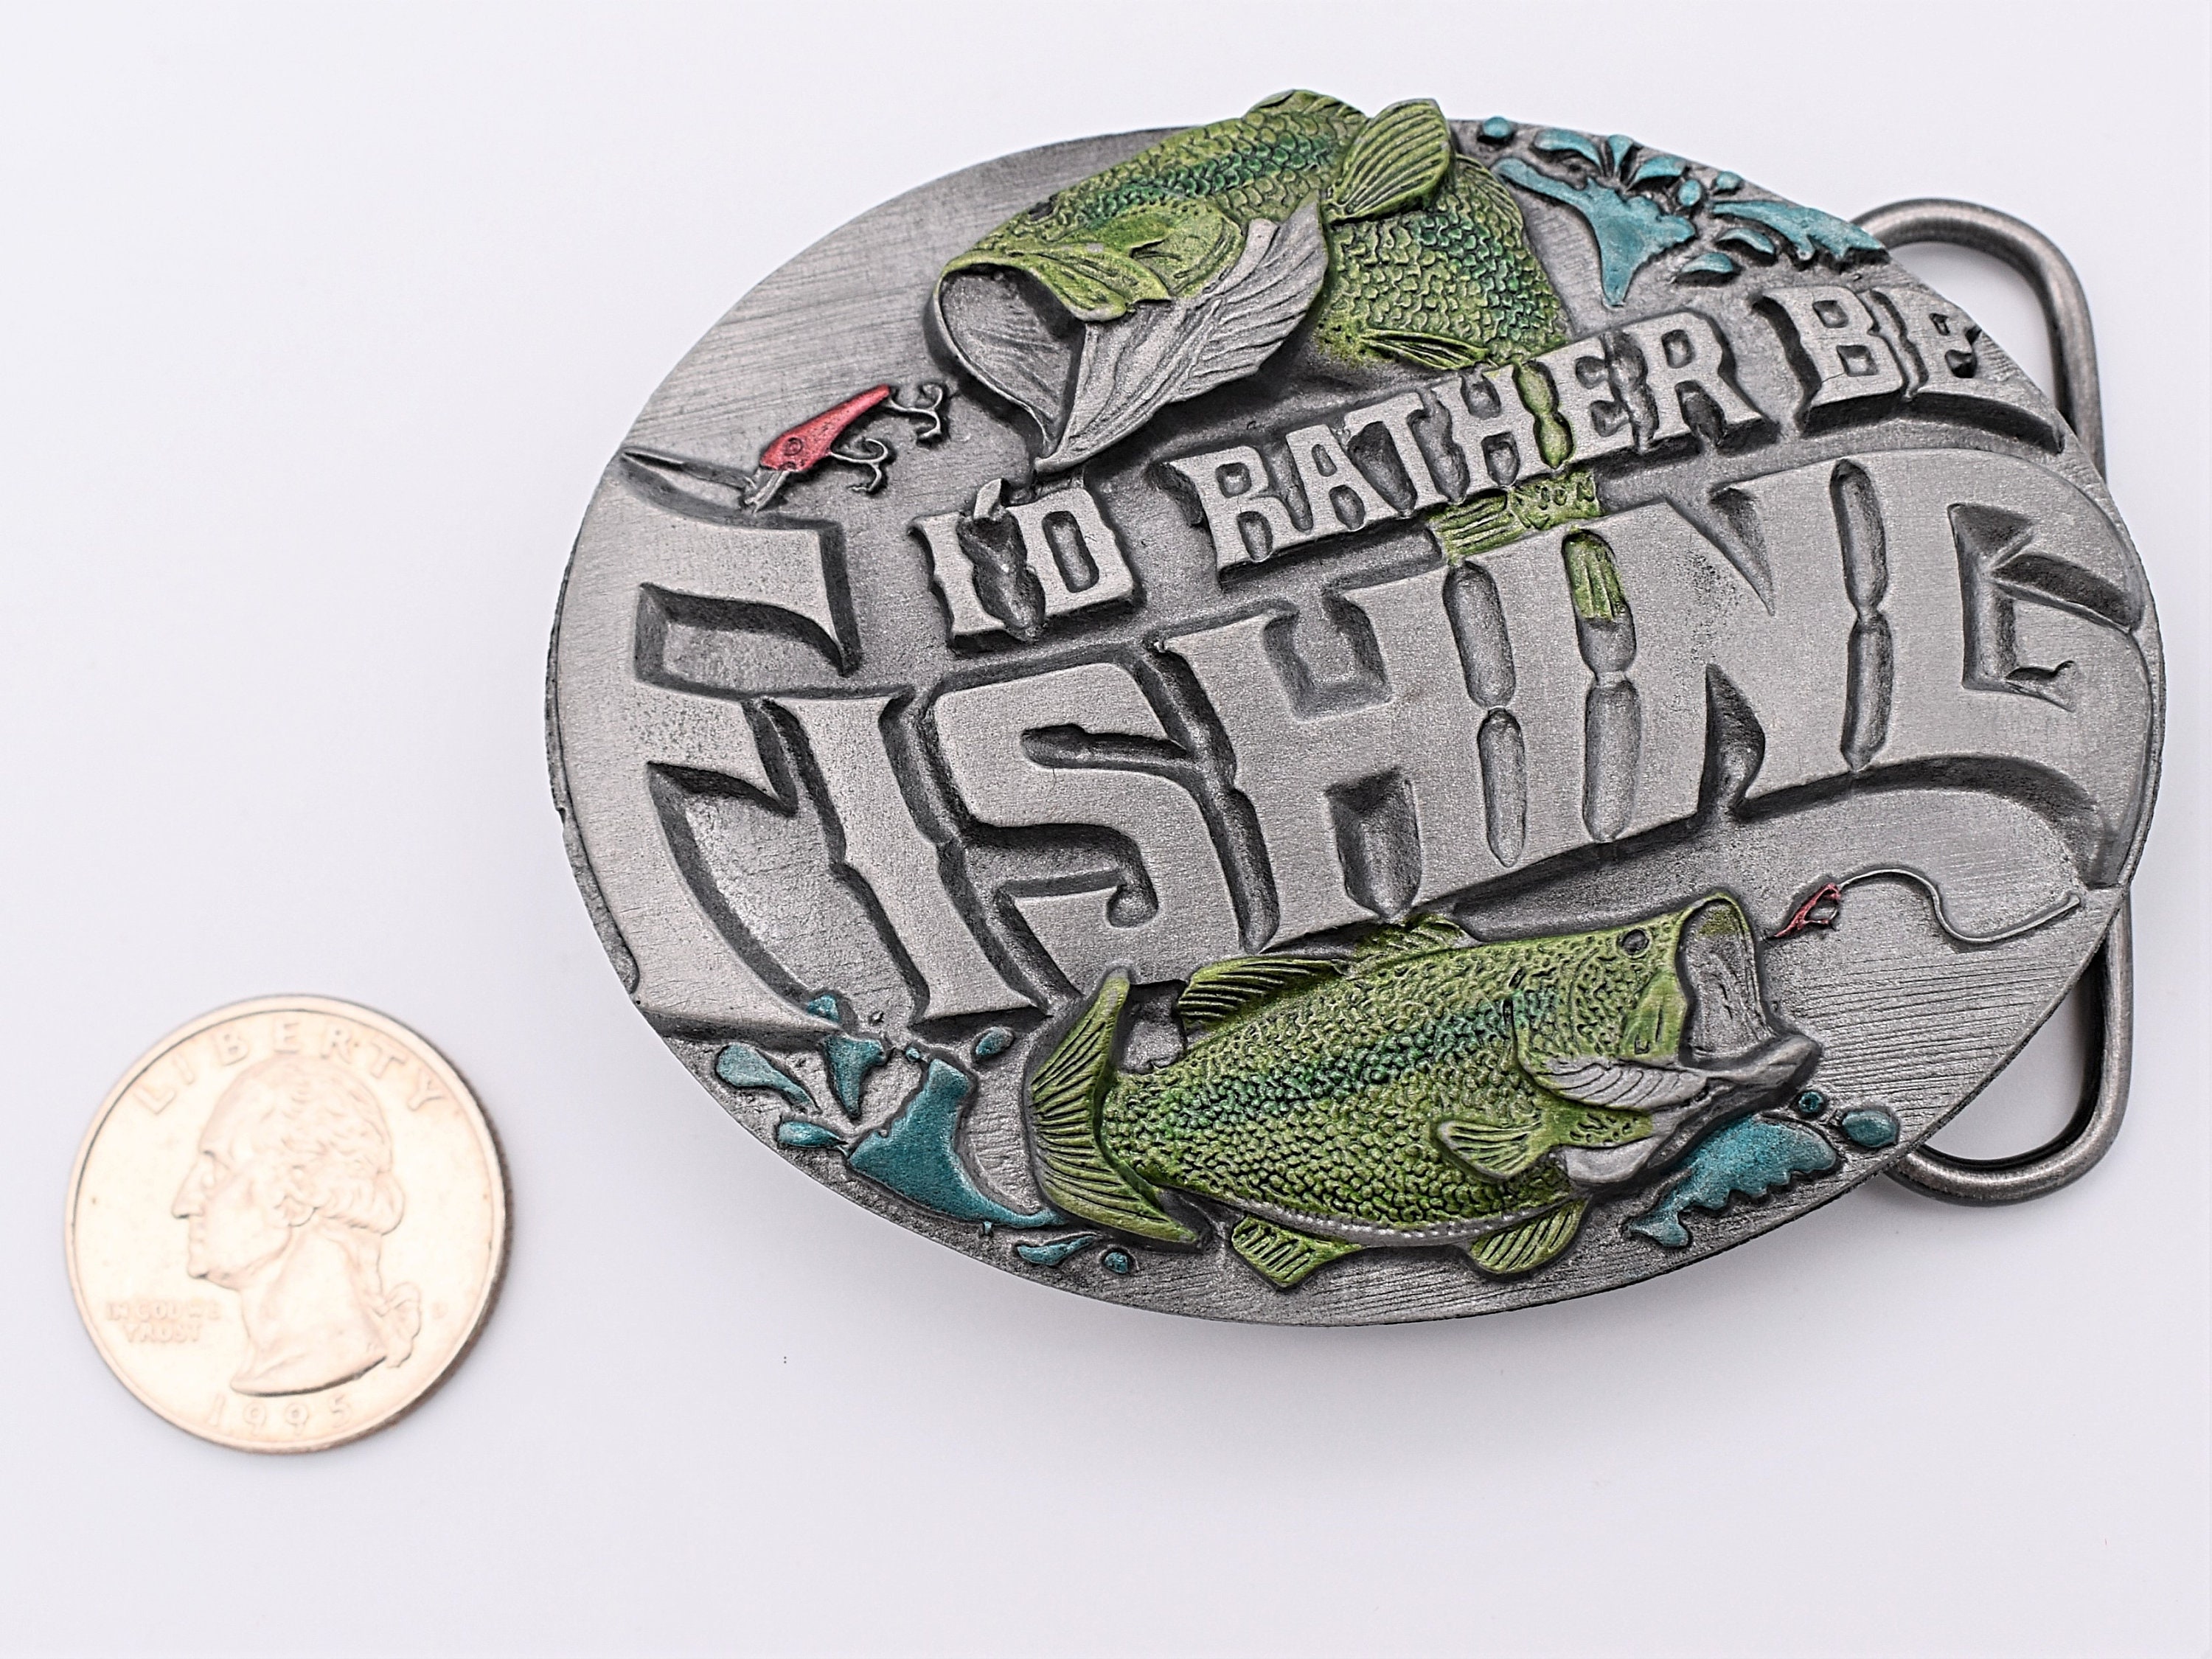 AlaskaShinyThings I'd Rather Be Fishing Bass Lure Hook Belt Buckle